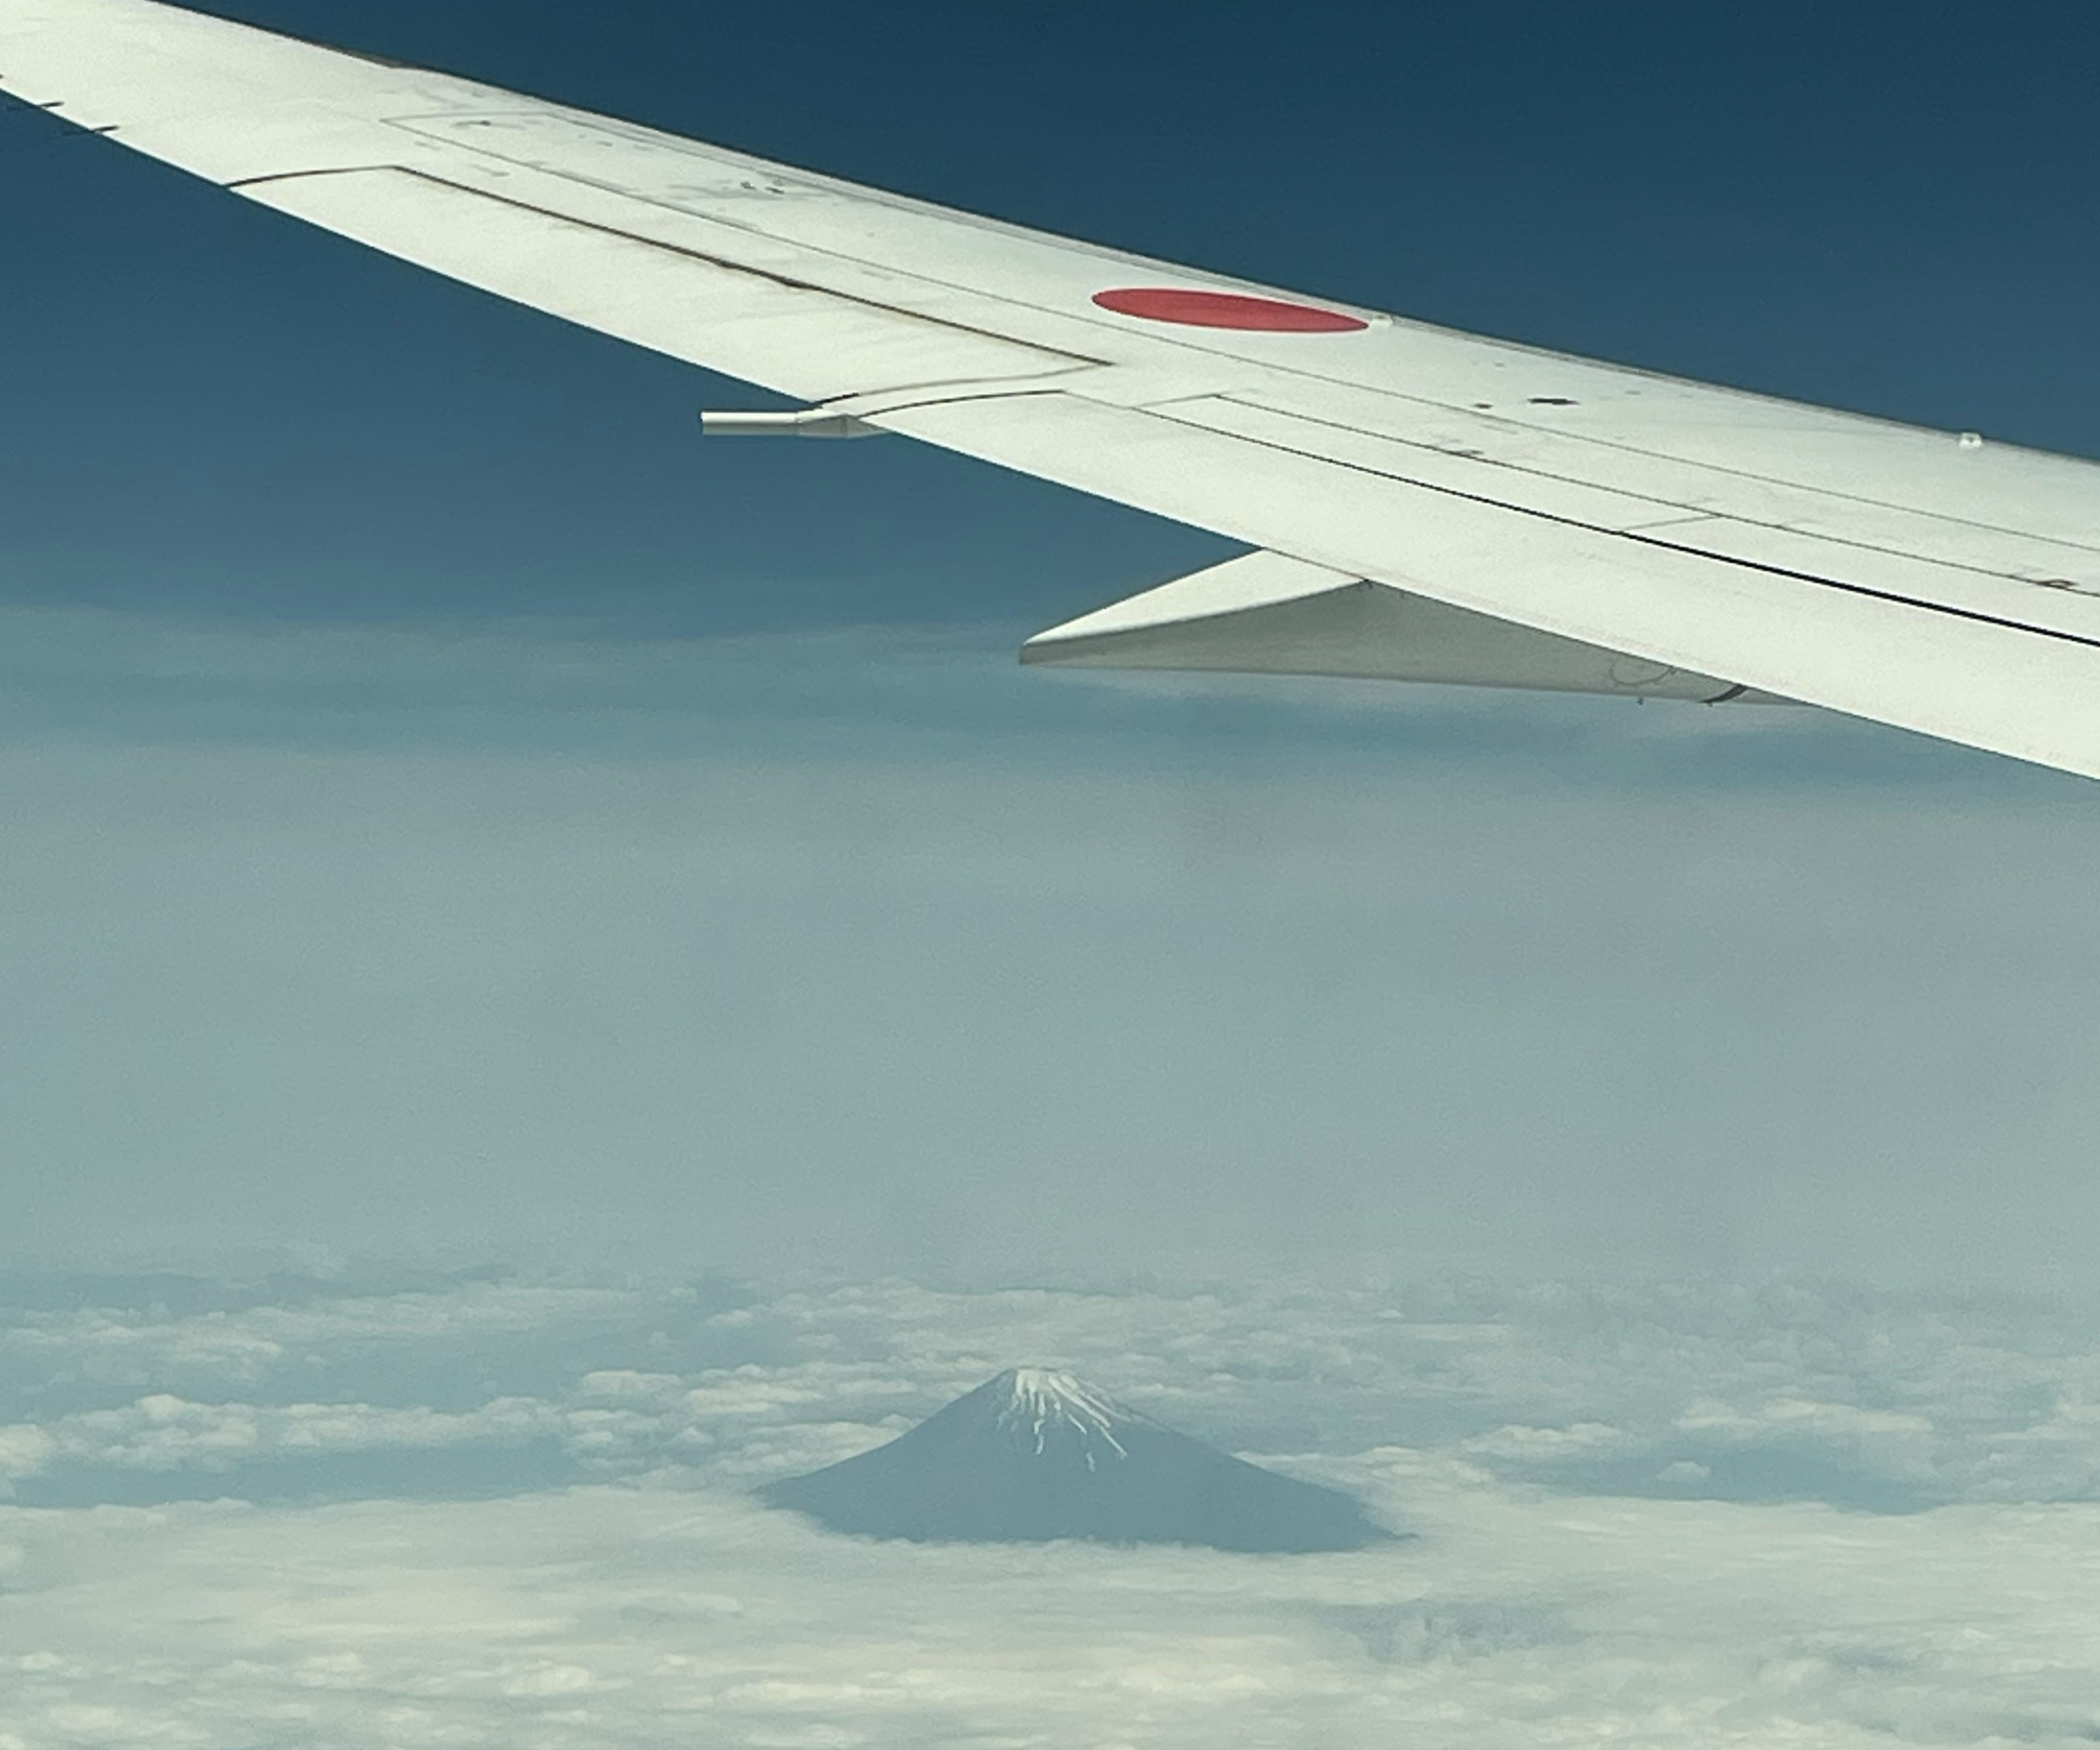 View of airplane wing over clouds with top of Mount Fuji peaking up through the clouds